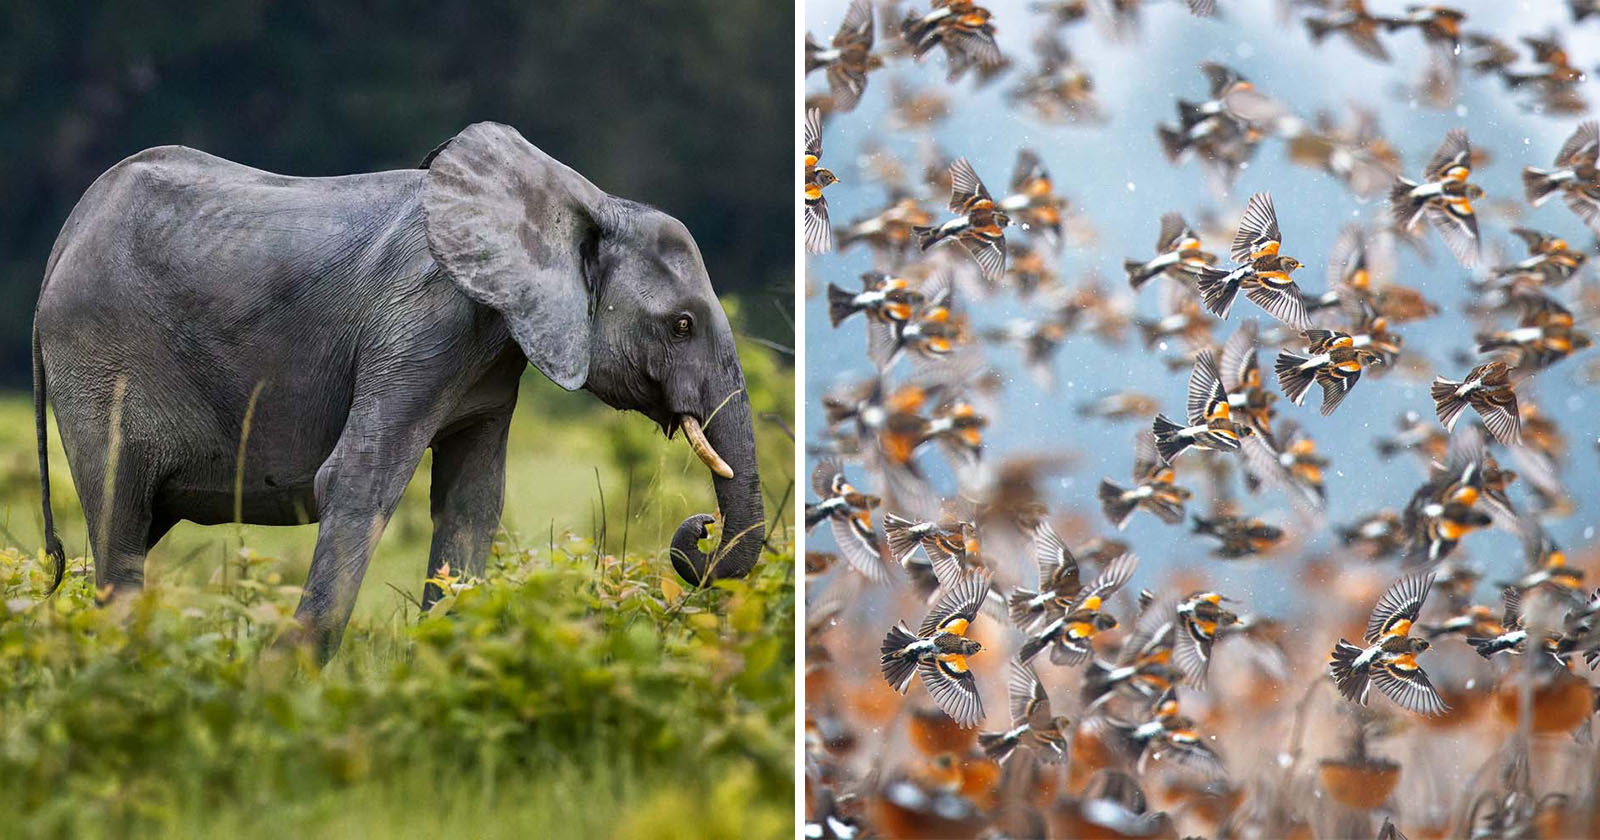 Prize-Winning Photo Story Shows the Plight of Endangered Elephants